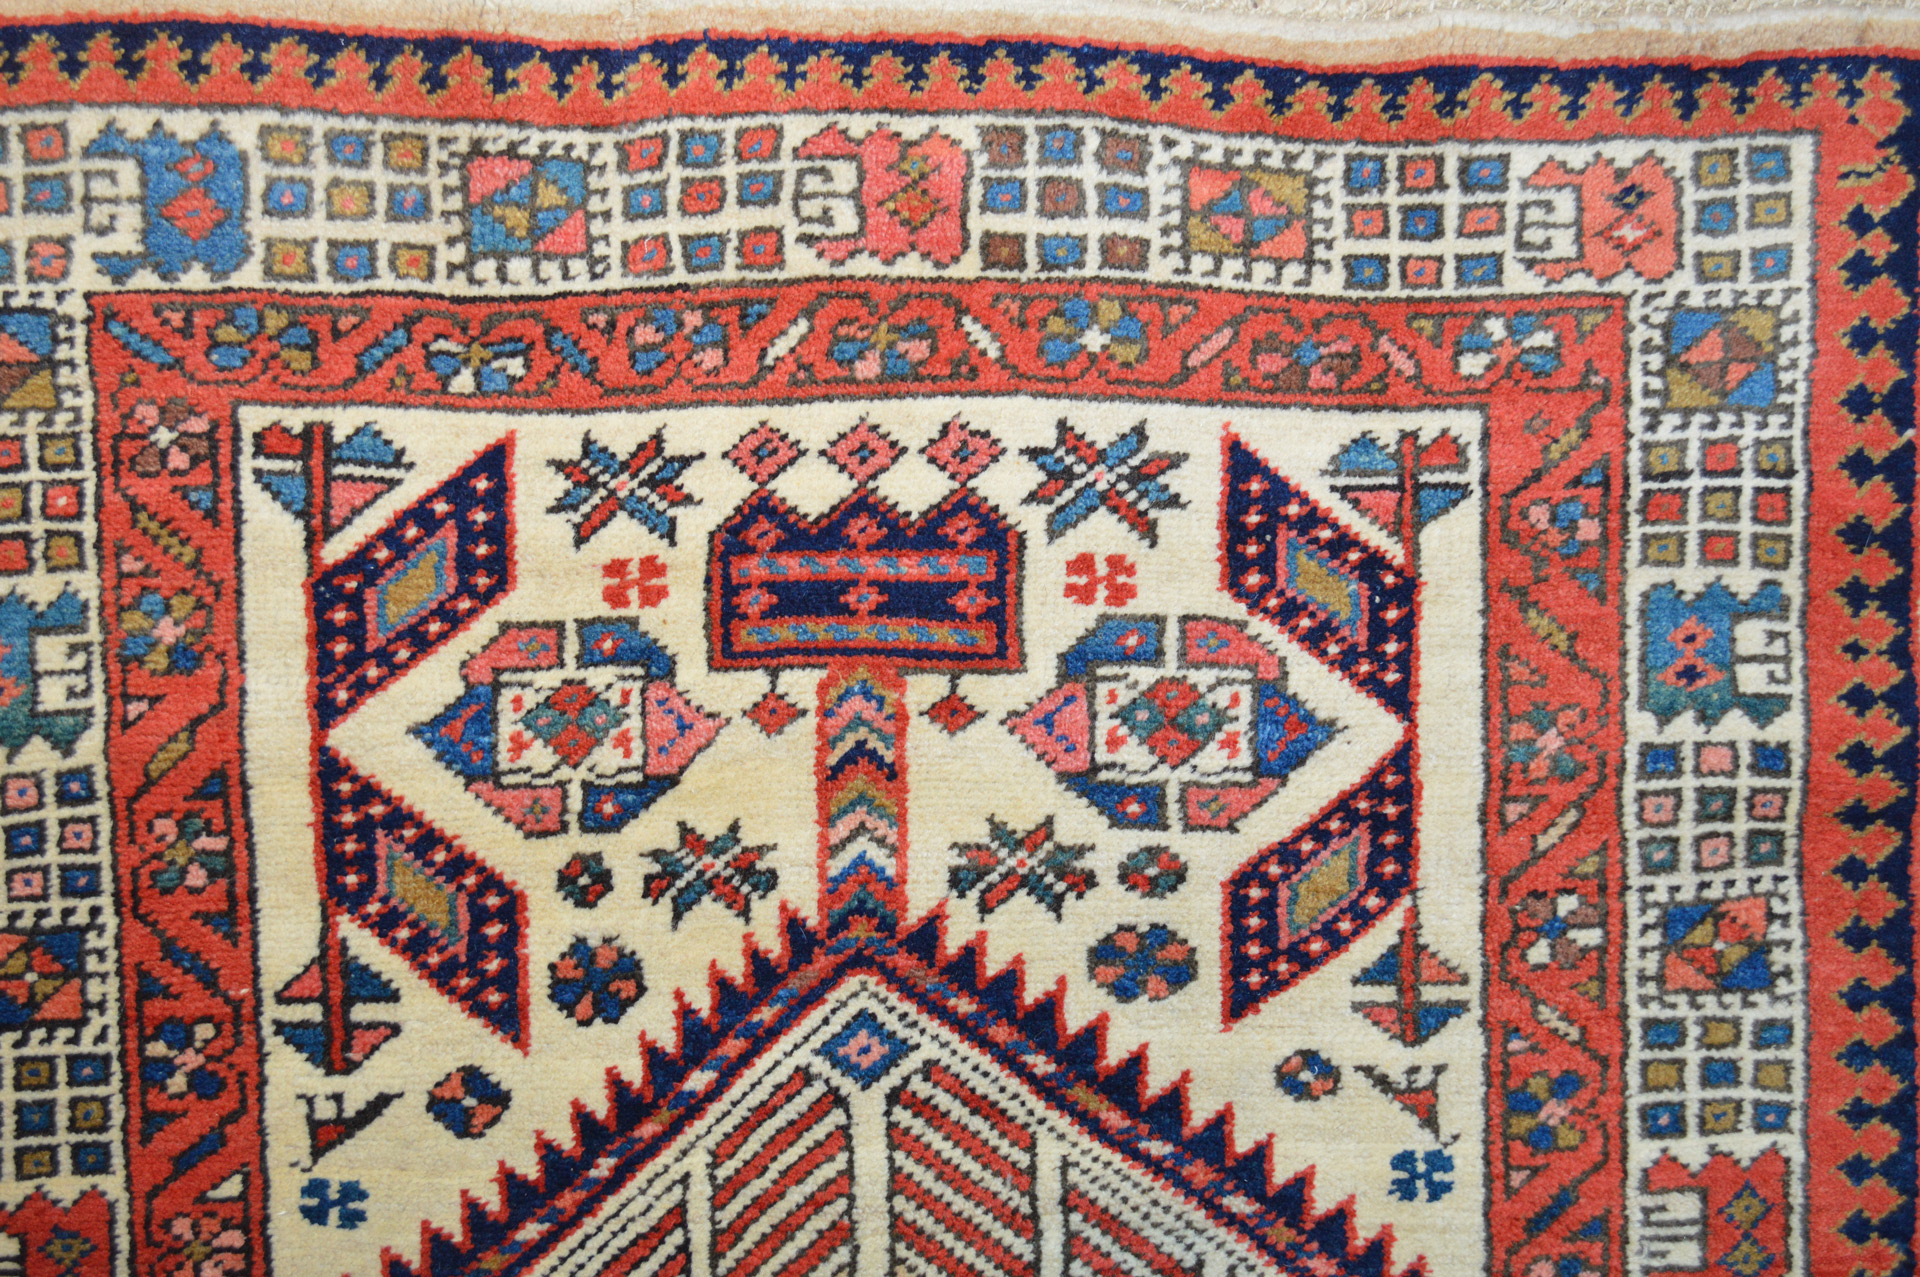 Detail of the field and border from a 3'5" x 8' antique northwest Persian Serab rug, circa 1930. Douglas Stock Gallery, antique Persian rugs Boston,MA area New England, antique rugs New York